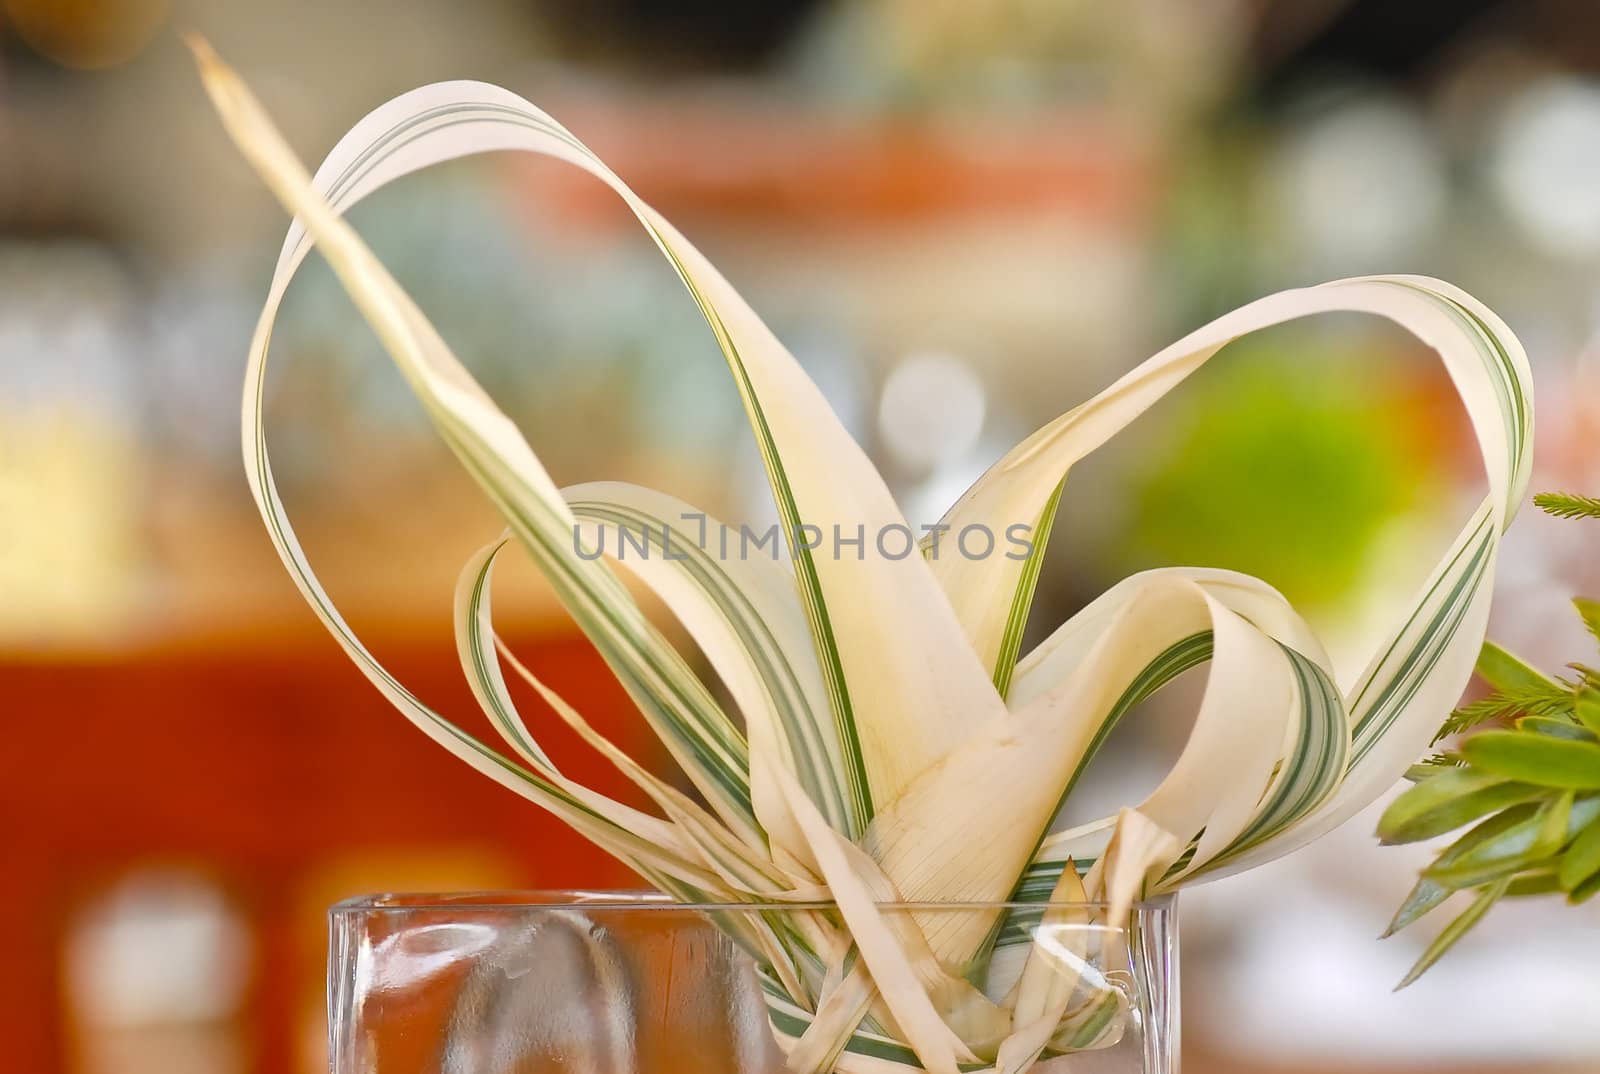 Protea leaves tied as ribbons as decorations on table